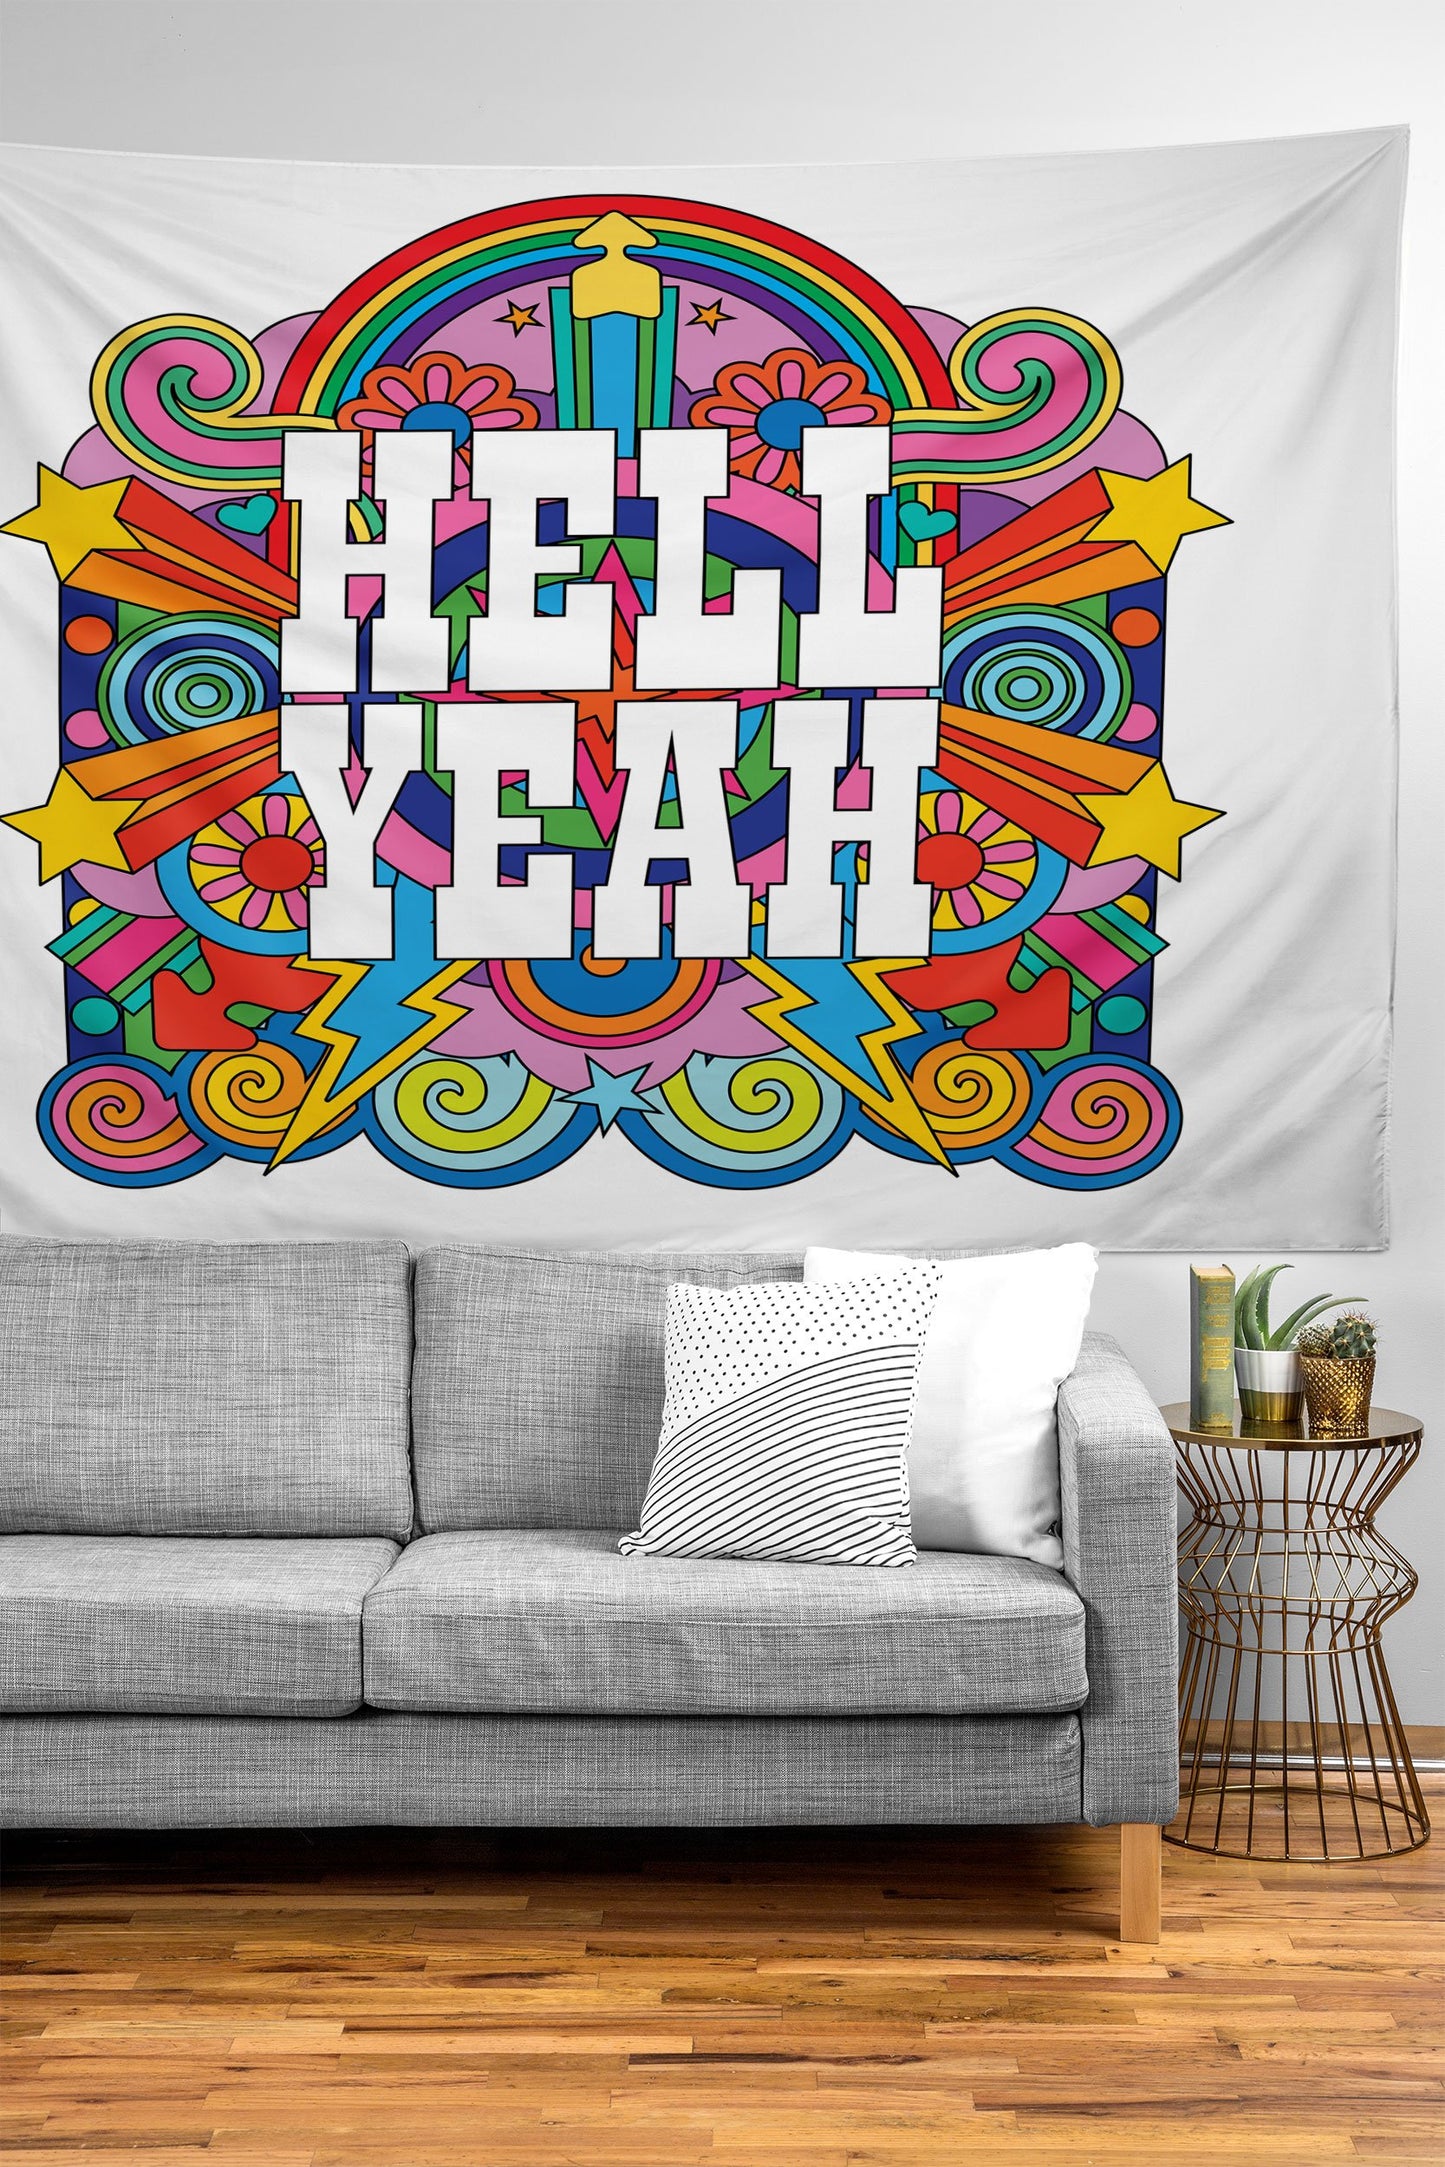 HELL YEAH Tapestry choice of sizes - cactus, classic western, cowgirl, decor, desert, HELL, hell yeah, hellyeah, picture, south western, southwestern pattern, southwestern print, southwestern style, southwestern., southwesterndecor, southwesternhome, southwesternhomedecor, southwesternprint, southwesterns, wall, walldecor, western, western accent, western design, western print, western scene, westernhime, westernhome, westernhomedecor, WESTERNPRINT, westerns, WESTERNT -  - Baha Ranch Western Wear